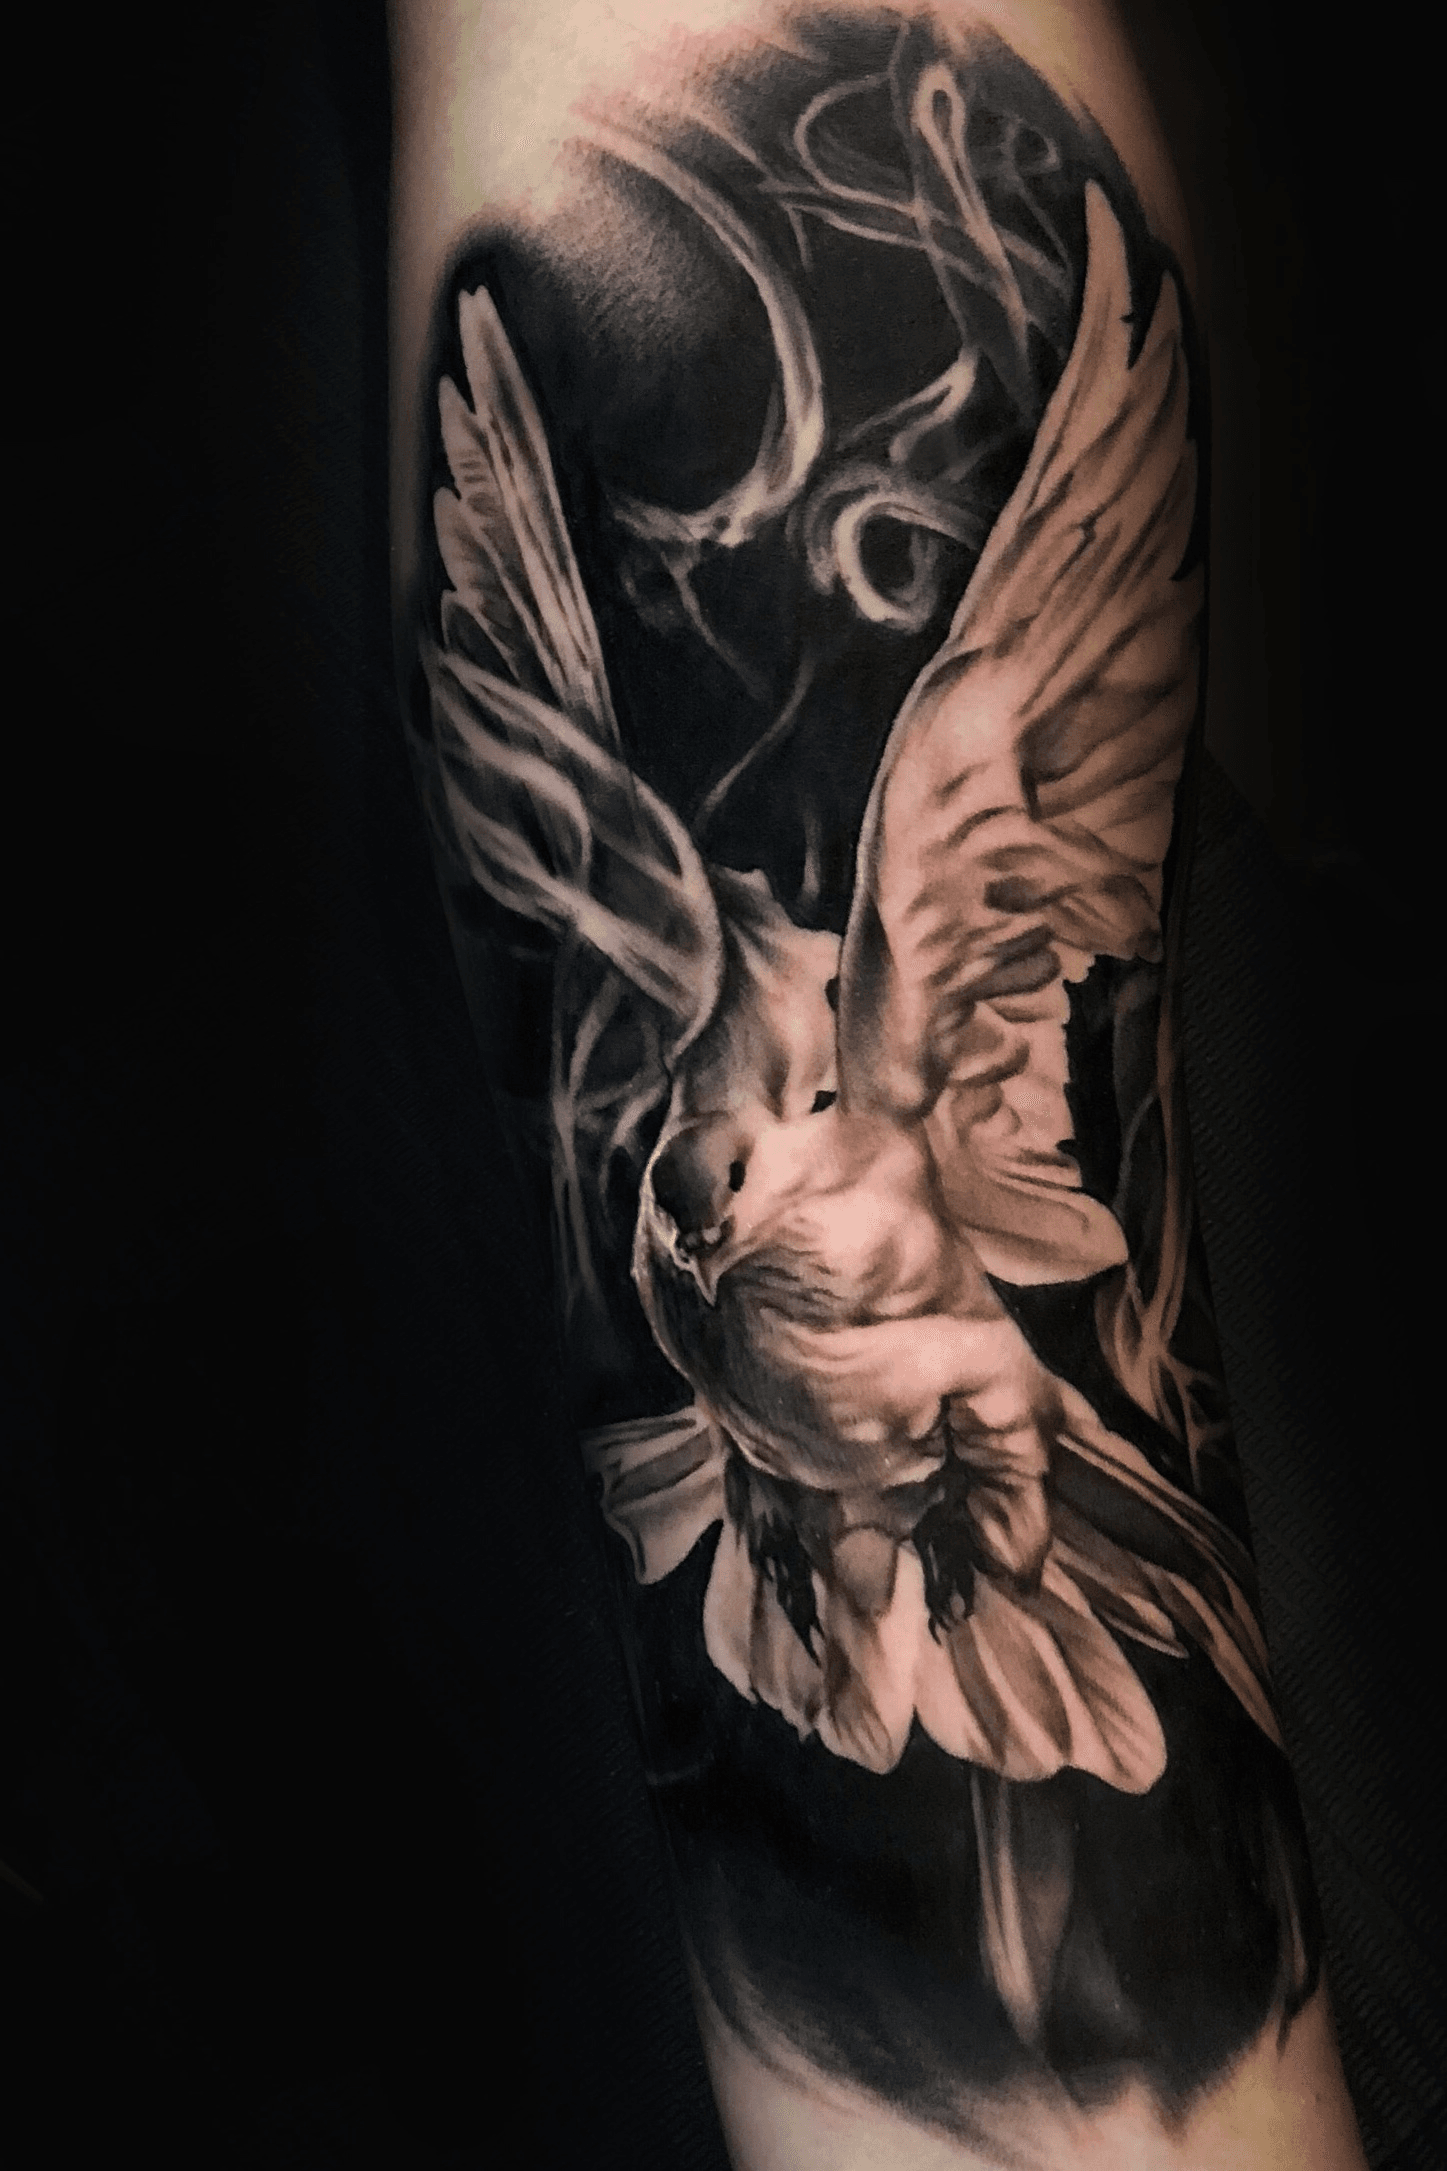 Moses and dove custom cover up tattoo in progress  Flickr